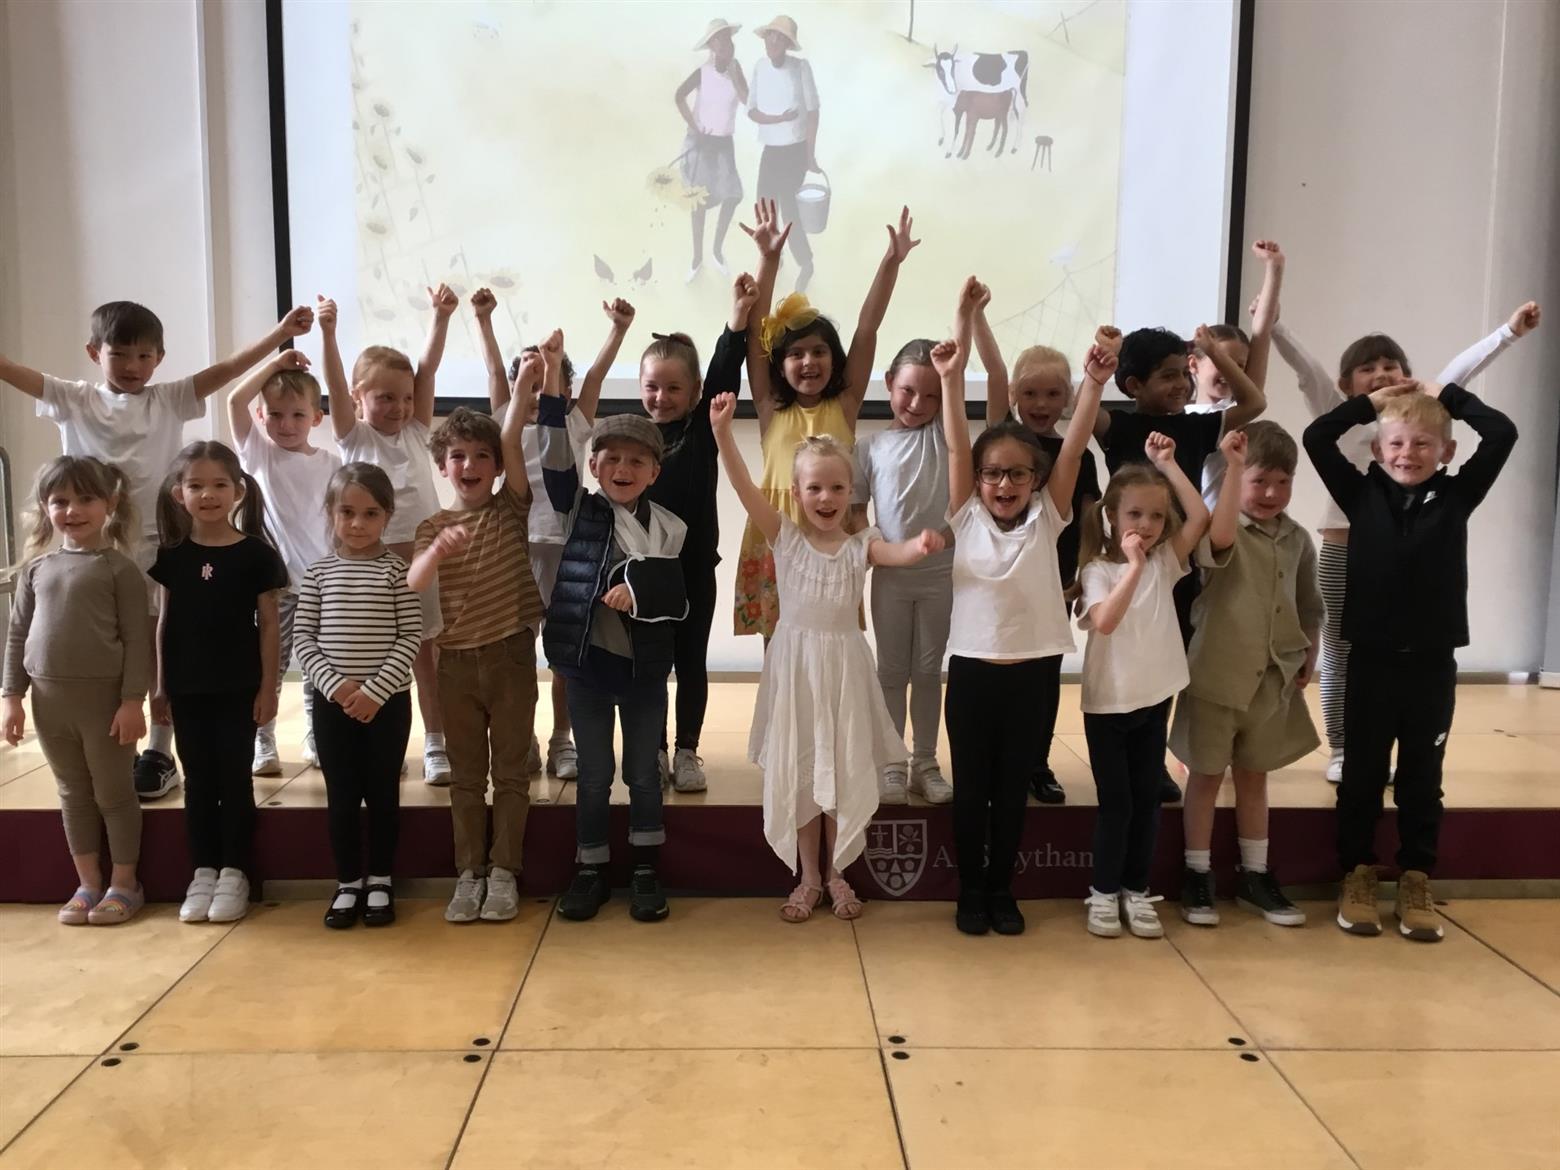 Year 1 pupils present their own assembly to school